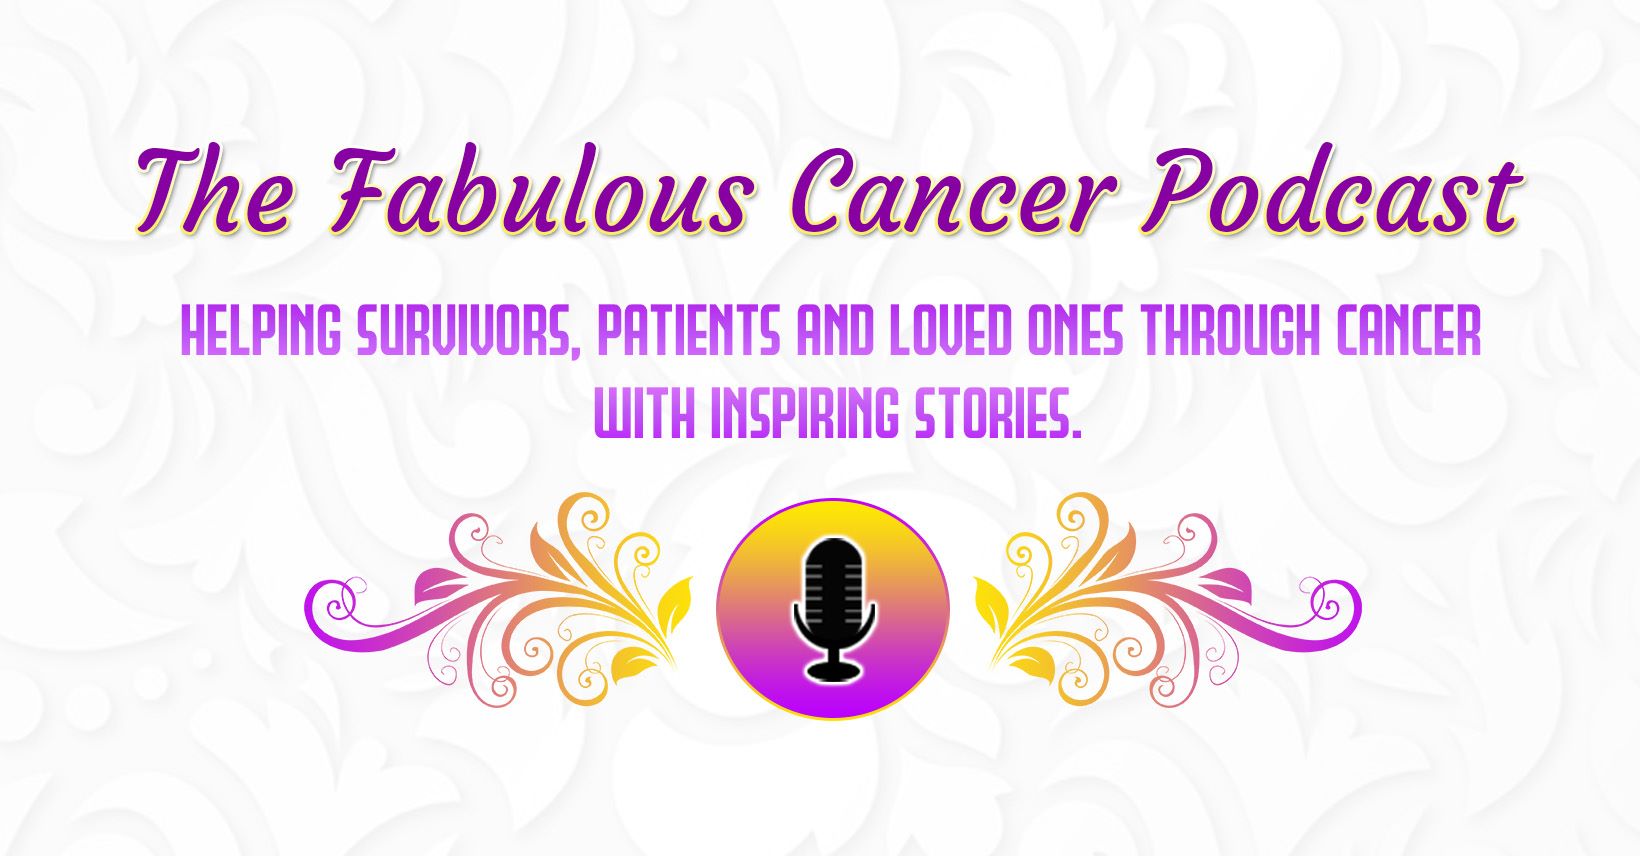 The Fabulous Cancer Podcast